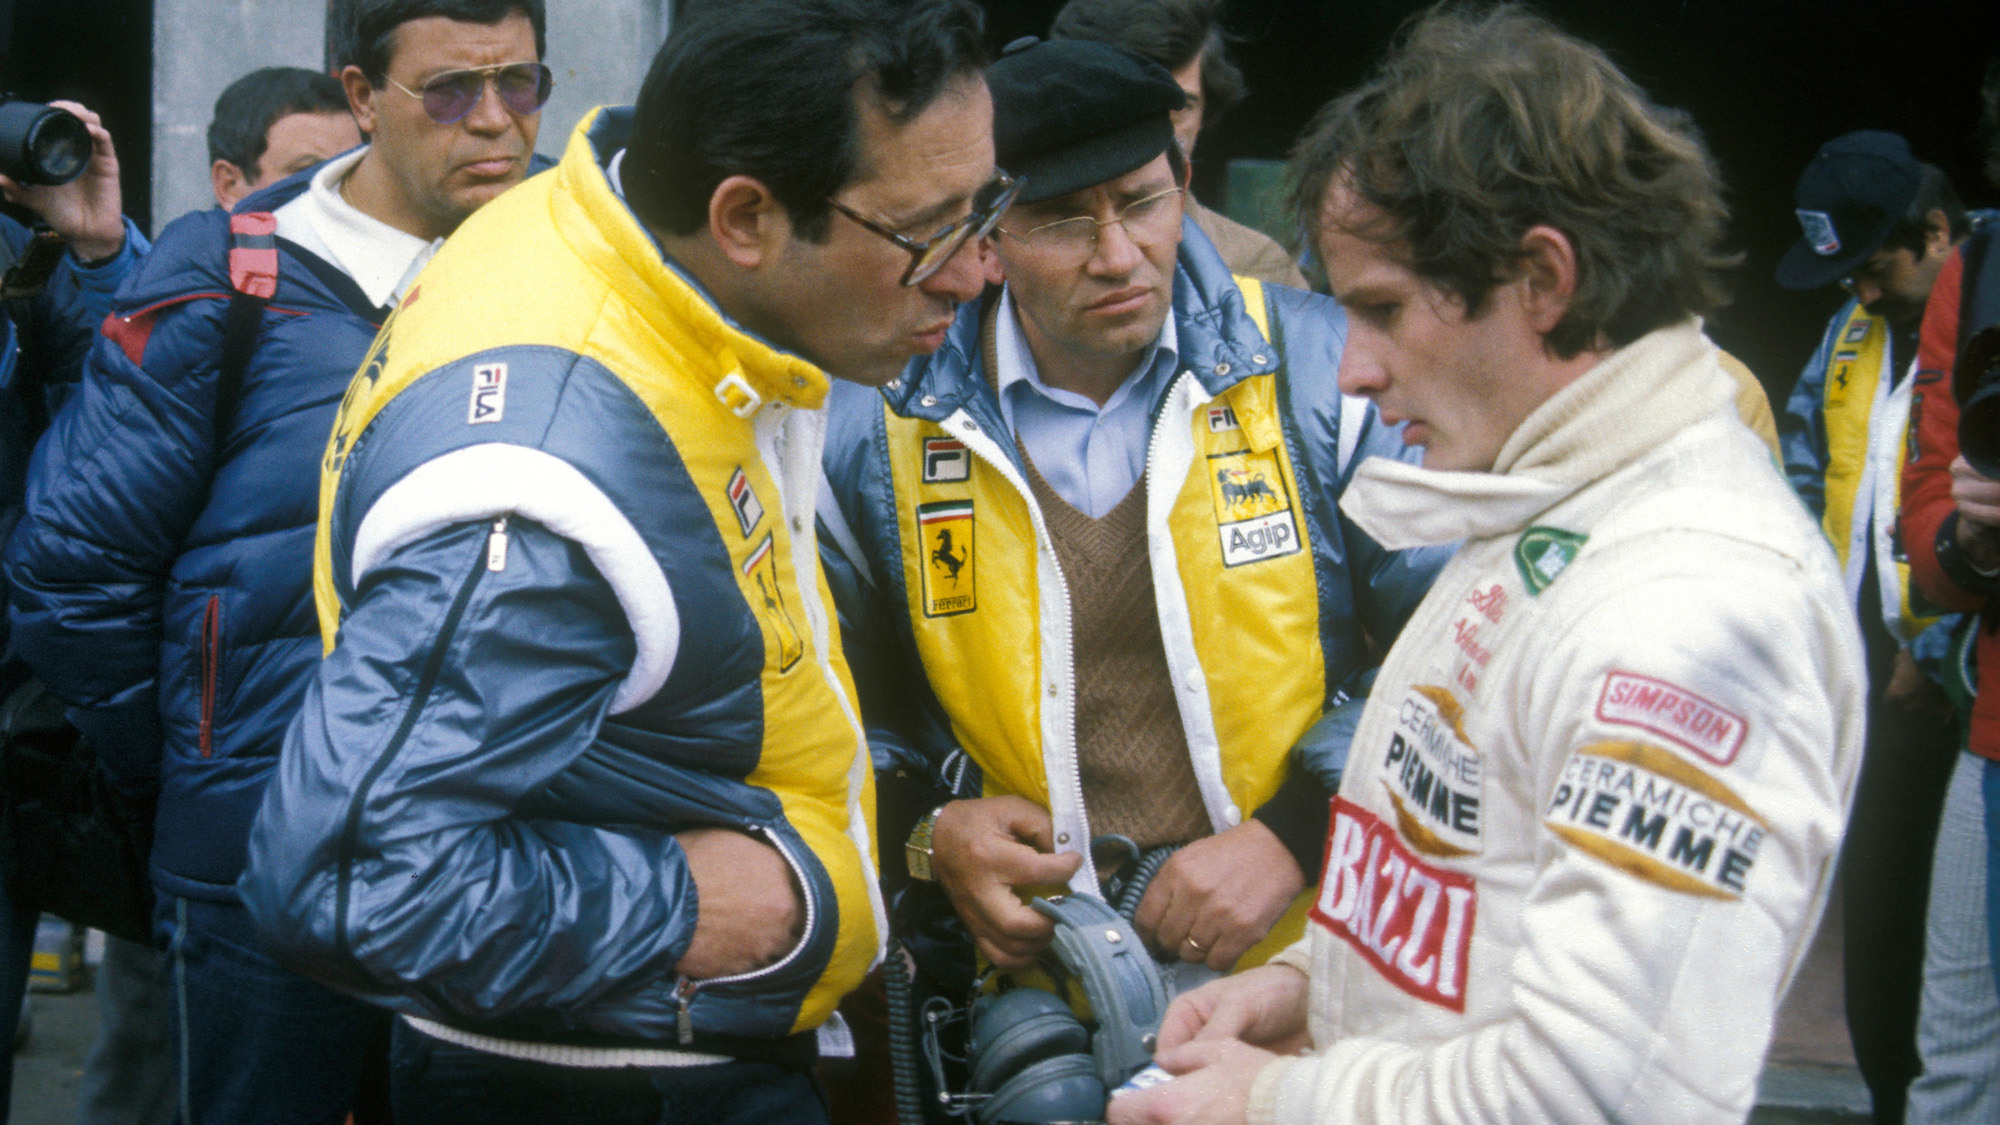 Mauro Forghieri and Antonio Tomaini speak to Gilles Villeneuve moments before he goes out for his final fateful practice at Zolder on 08 May 1982.